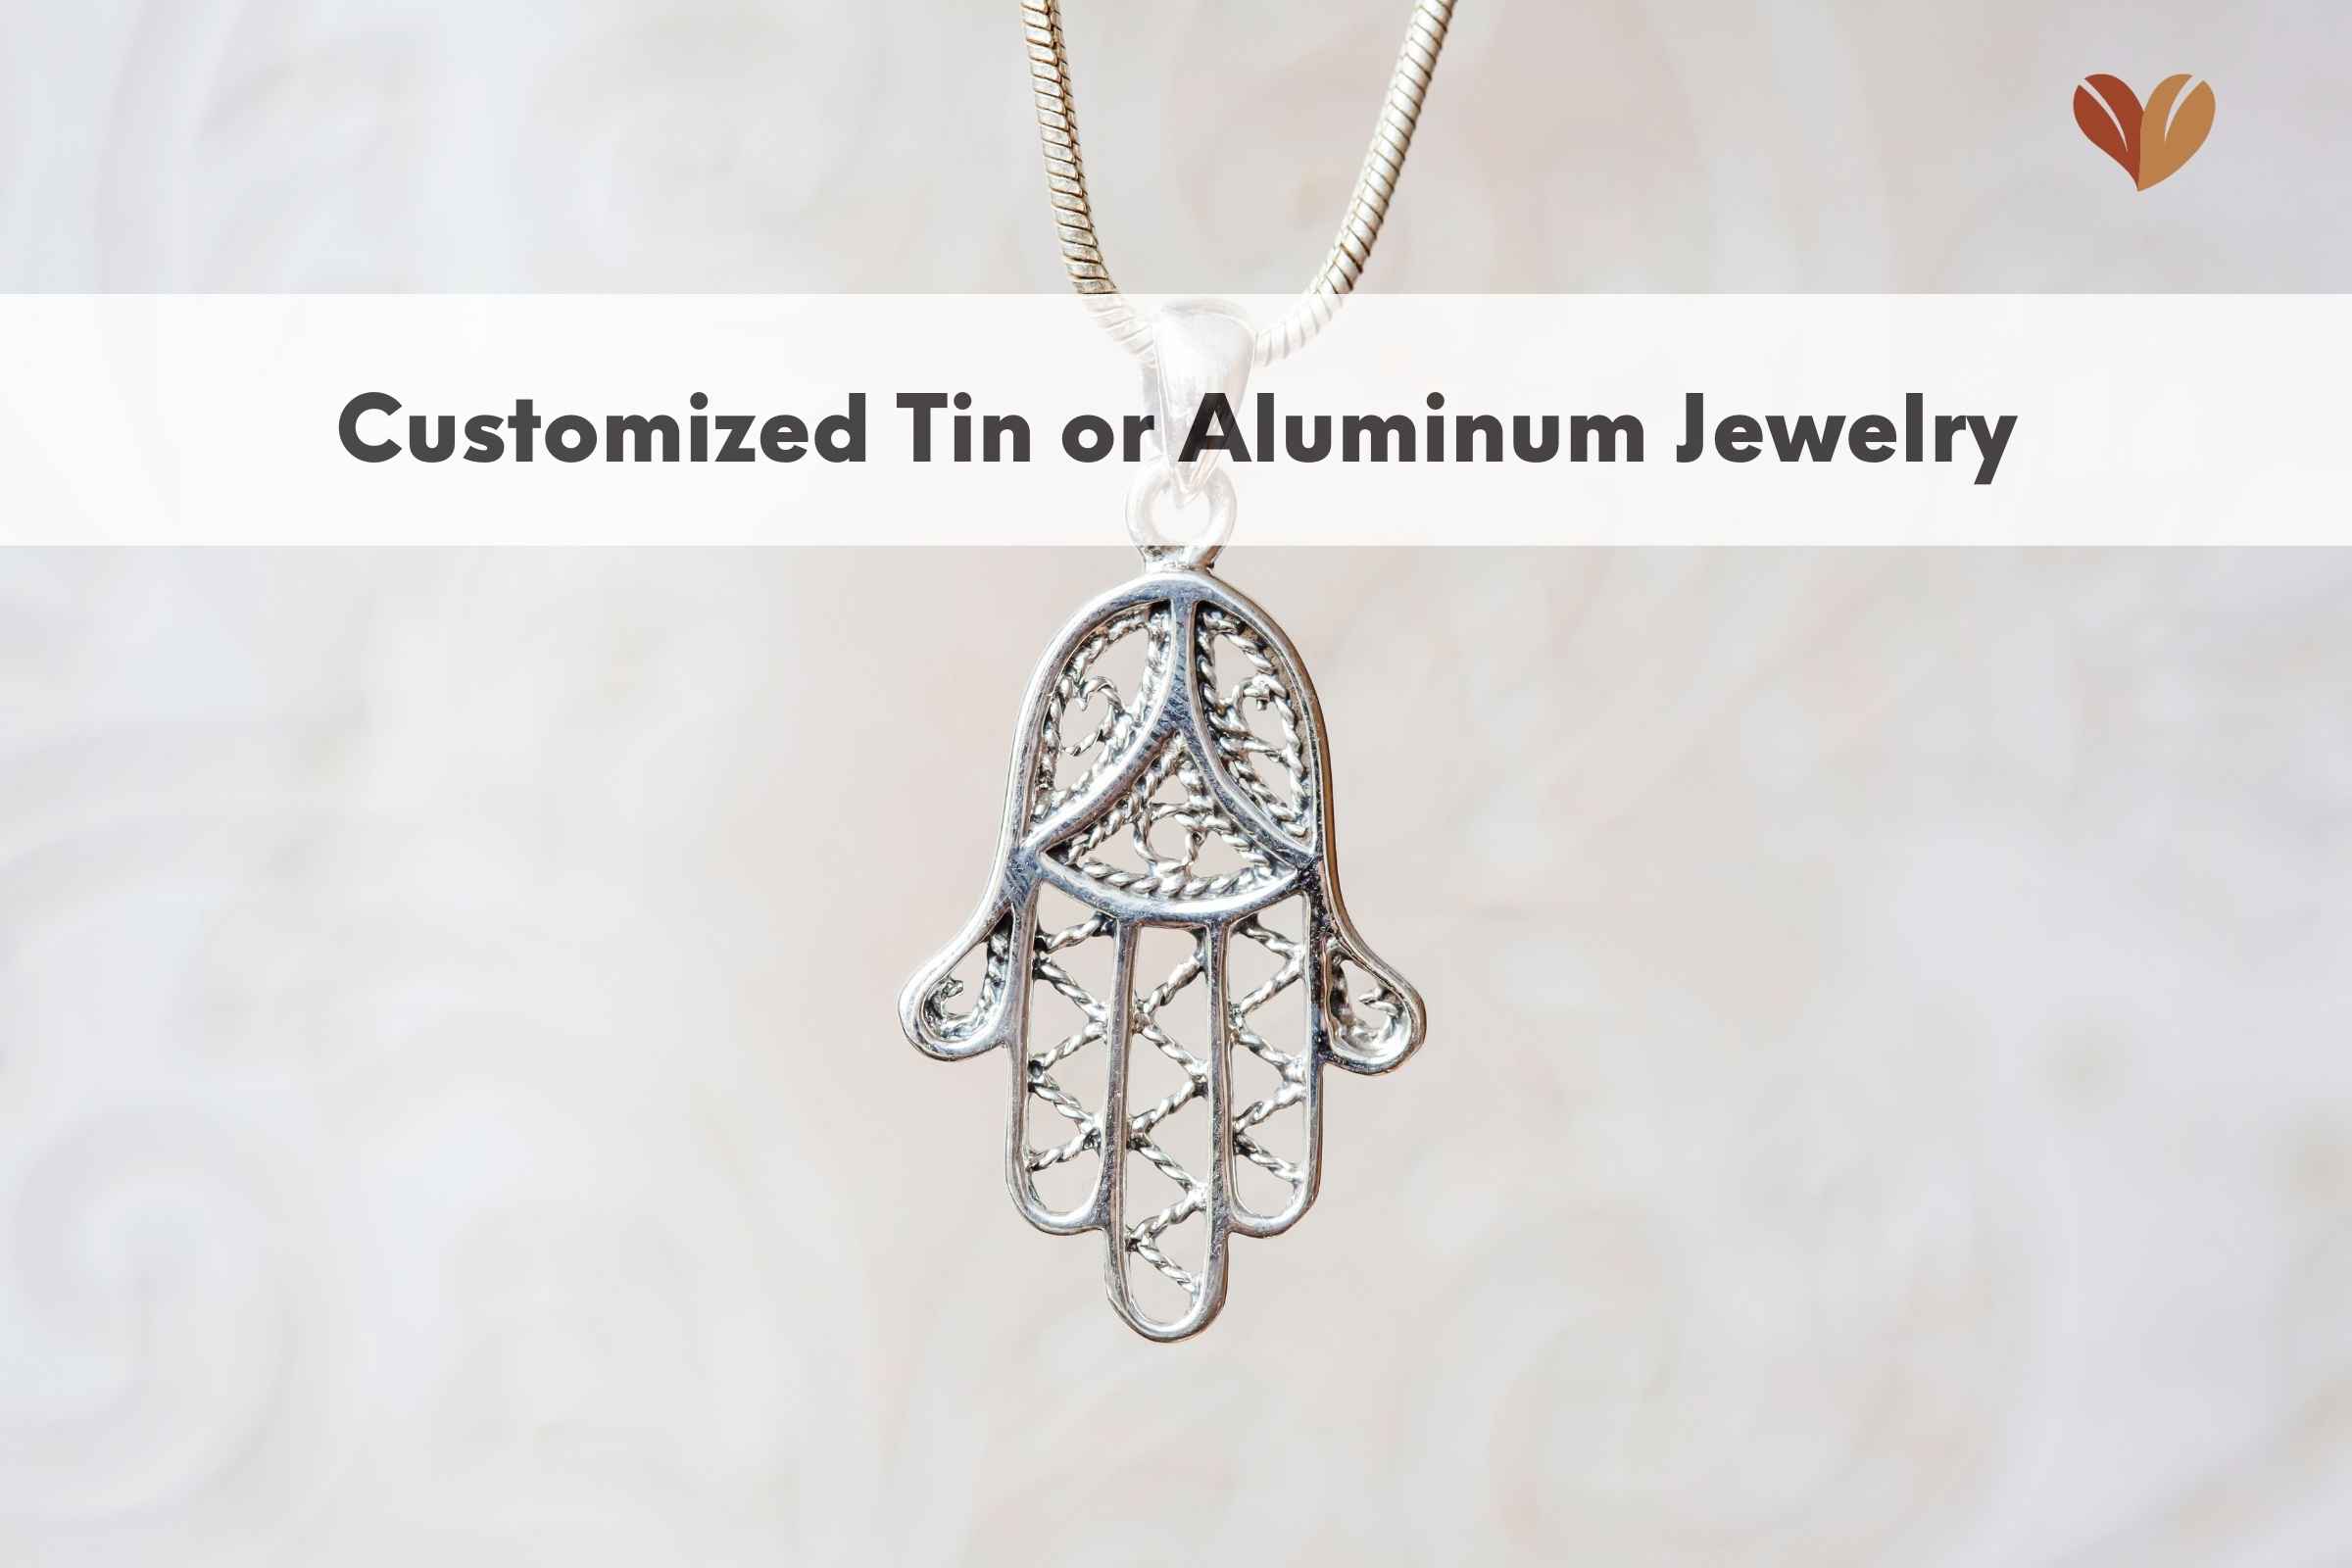 Customized Tin or Aluminum Jewelry - 10-year anniversary gifts for her